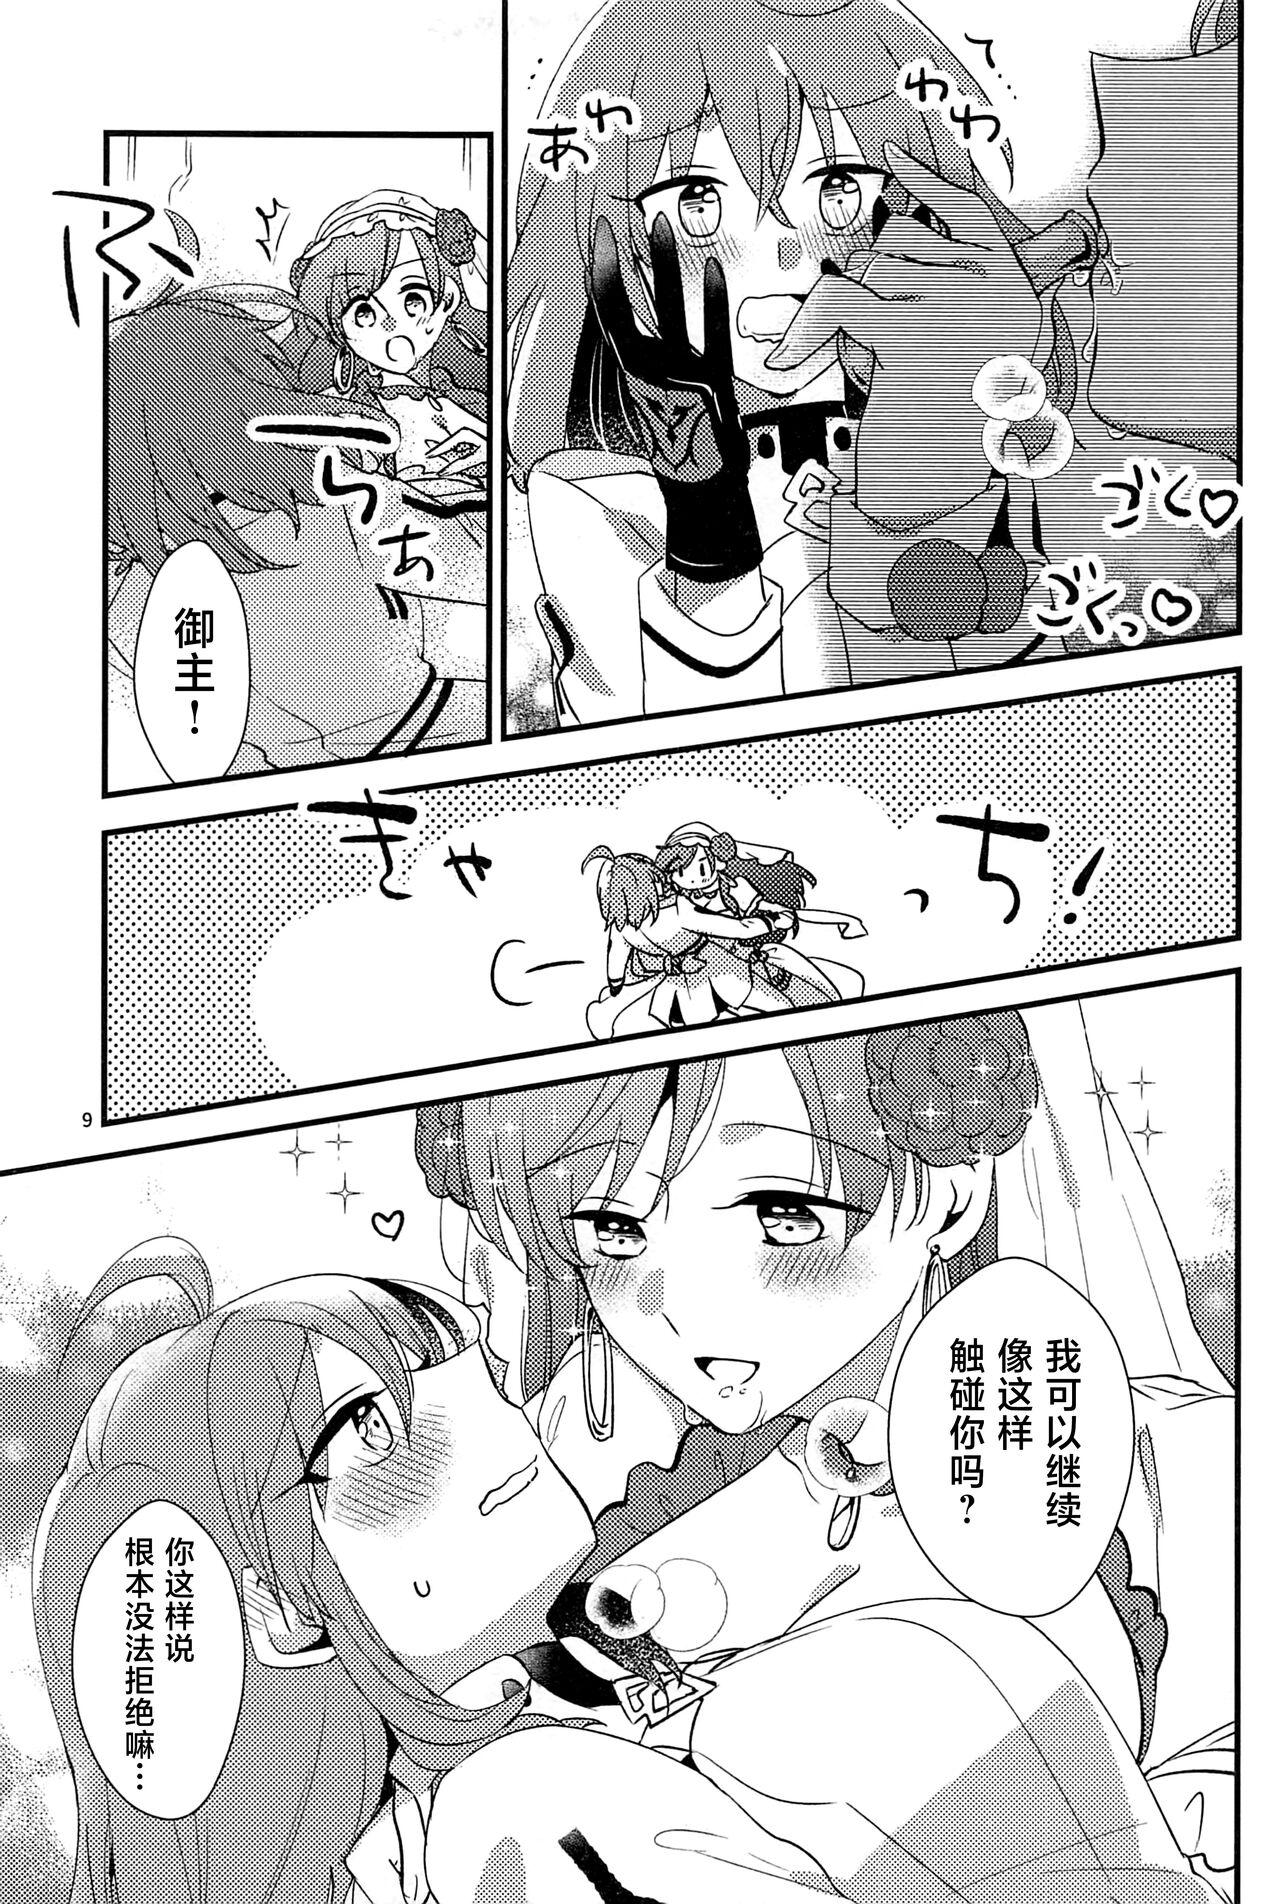 Milfs 媚薬飲まないと出られない部屋MG - Fate grand order Gay Pawnshop - Page 8